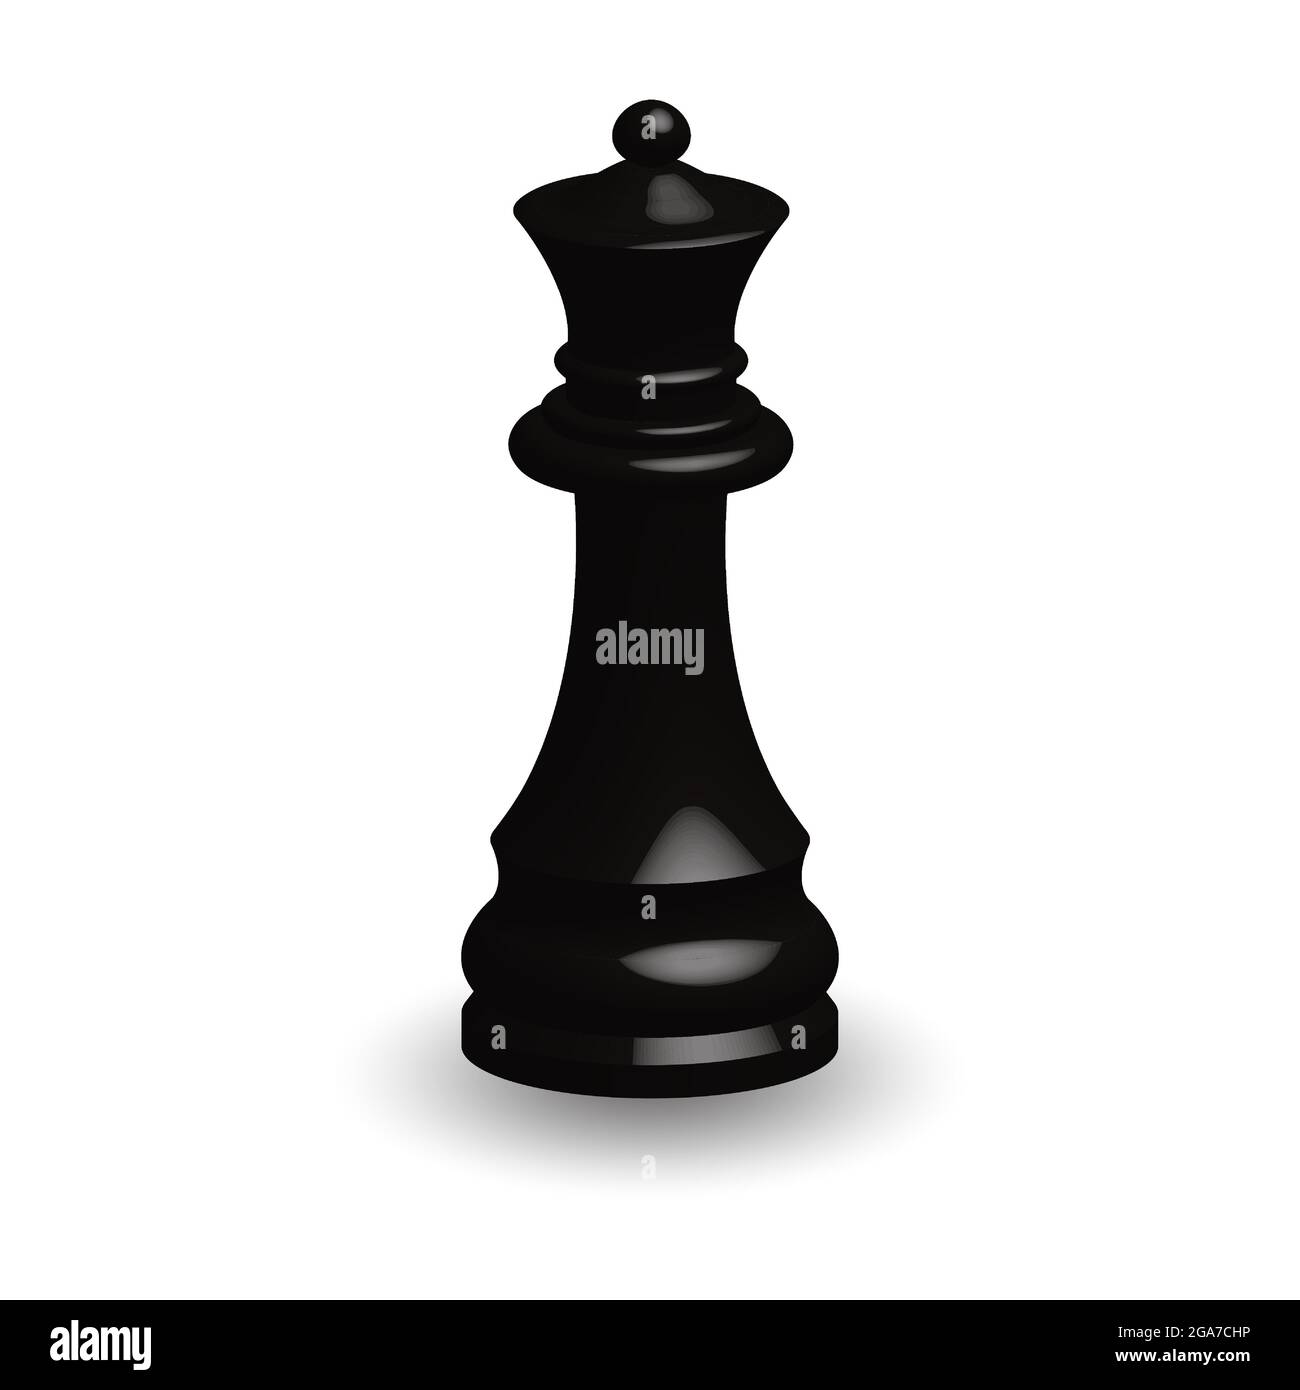 90,254 Queen Chess Piece Images, Stock Photos, 3D objects, & Vectors